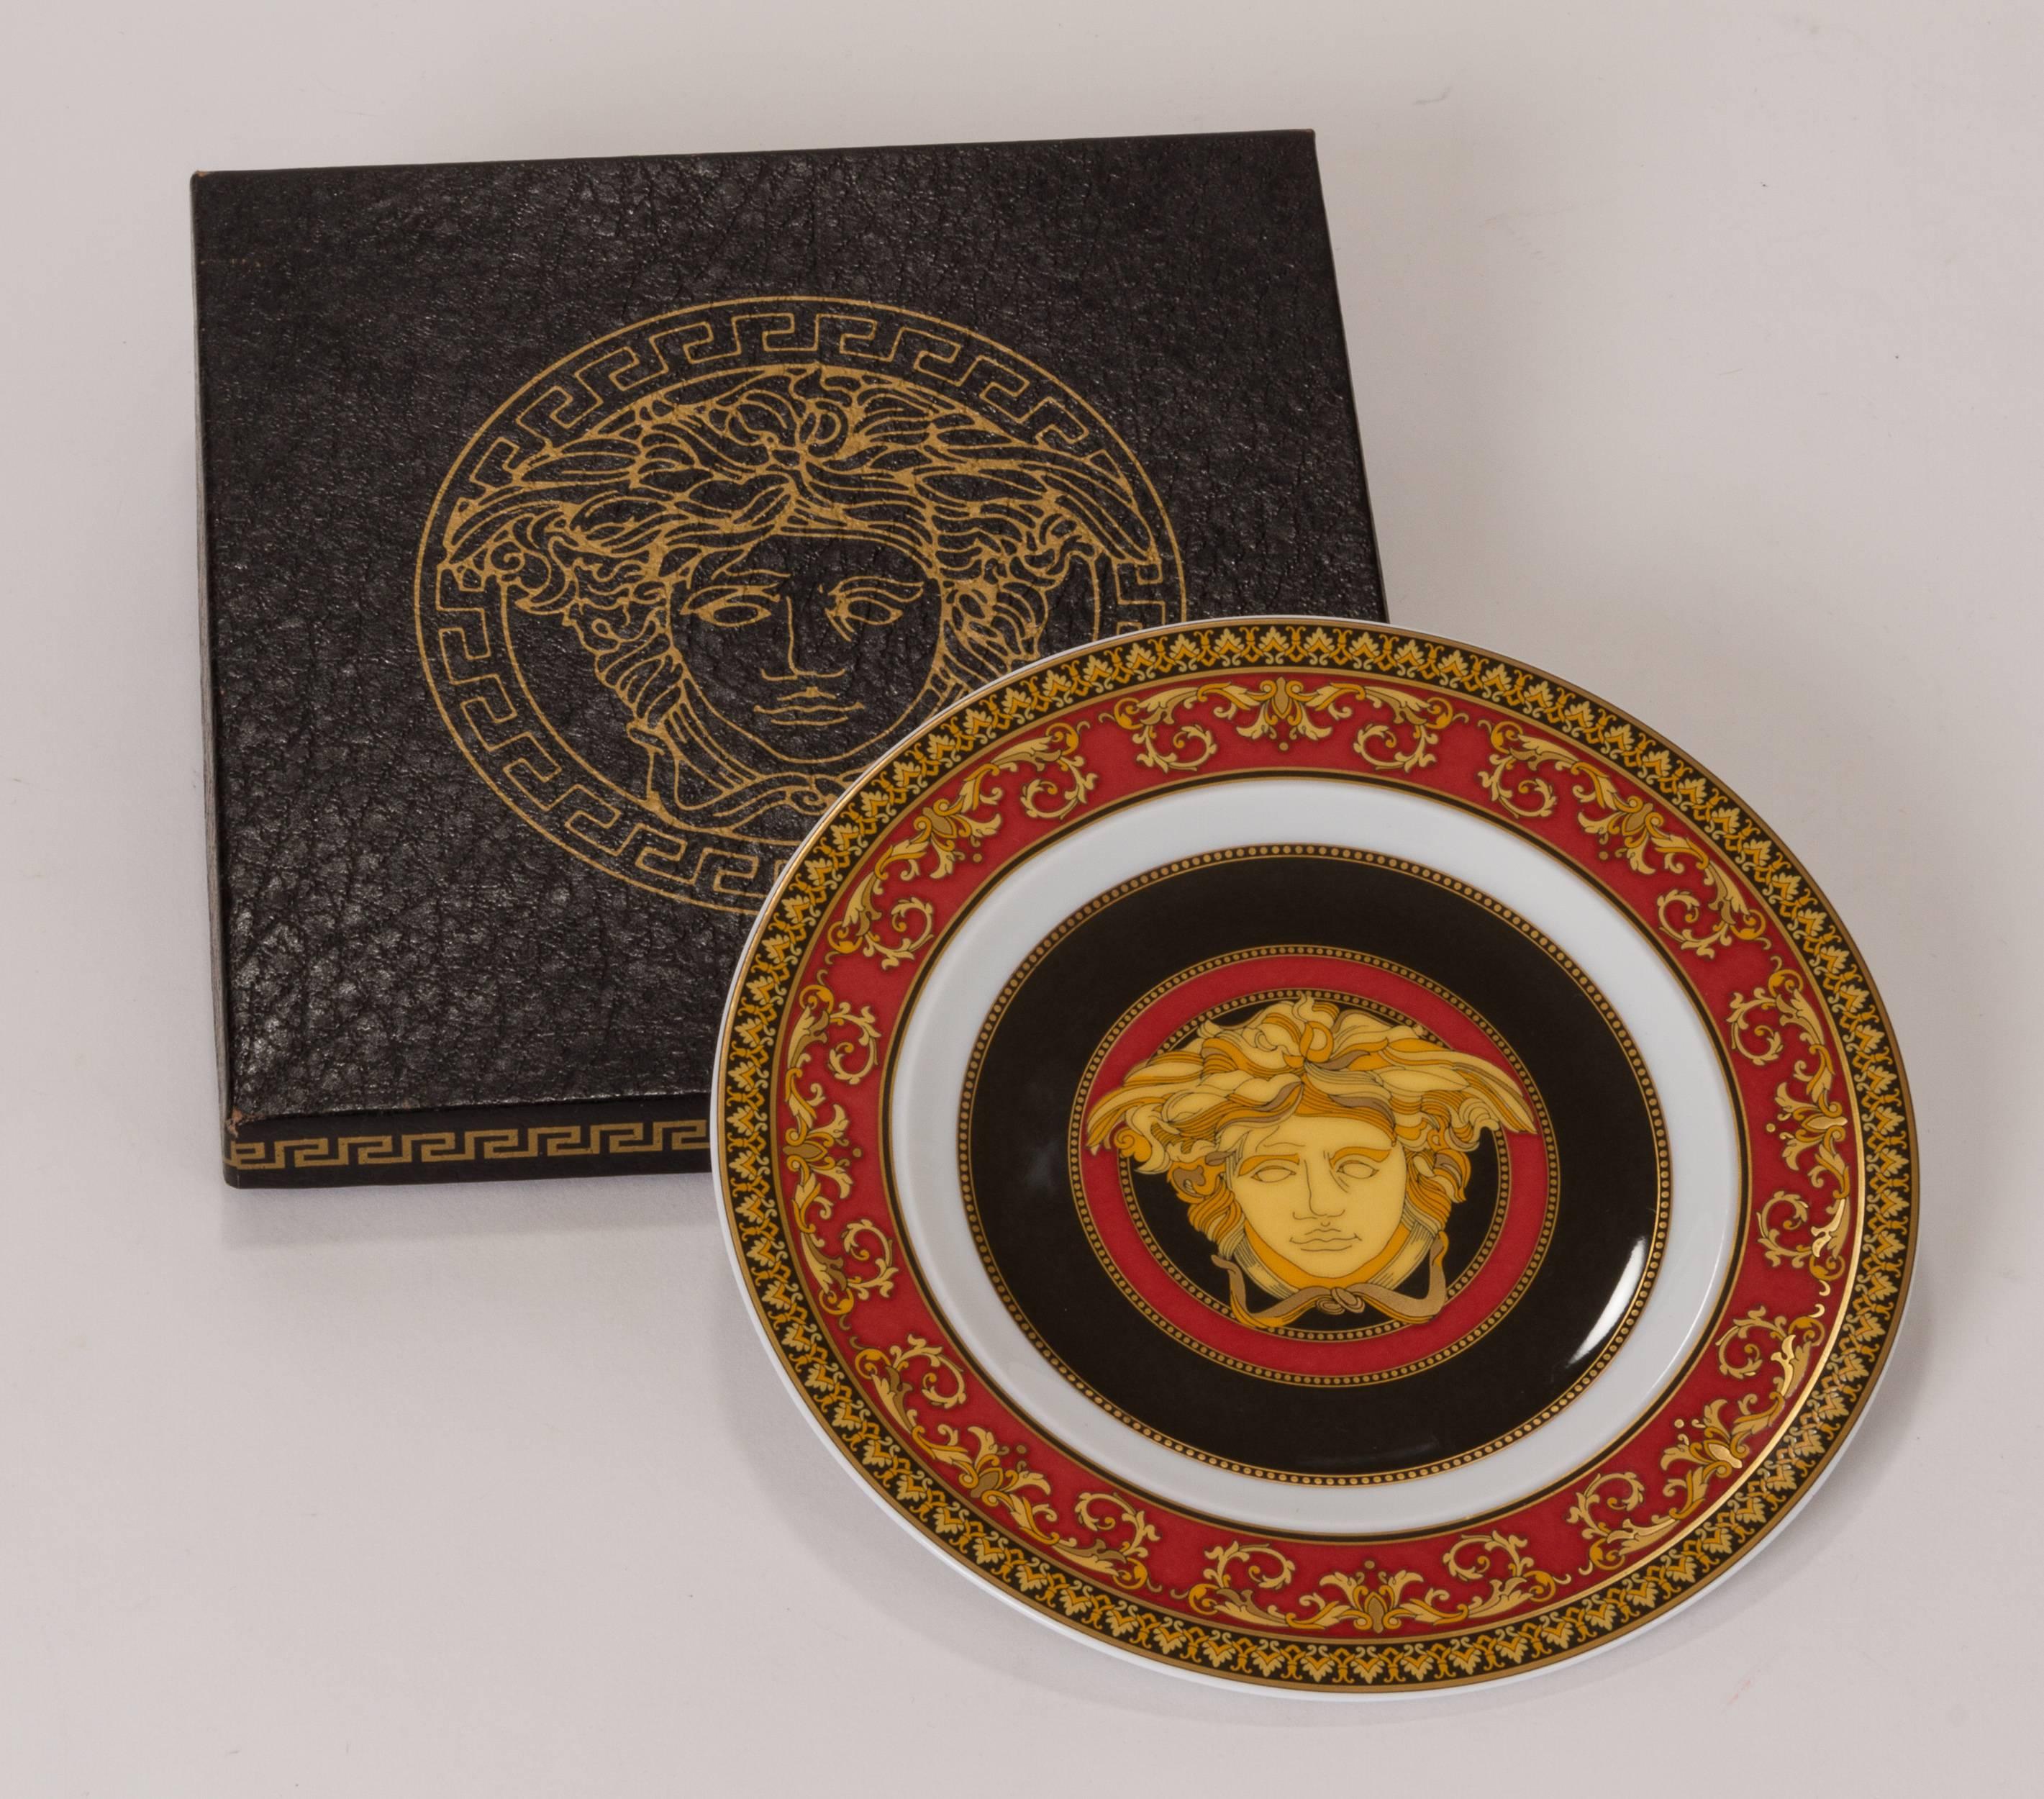 Gianni Versace Medusa pattern dessert /salad plate. Rosenthal , Germany production. Mint condition. Comes with original box. Set of 6
